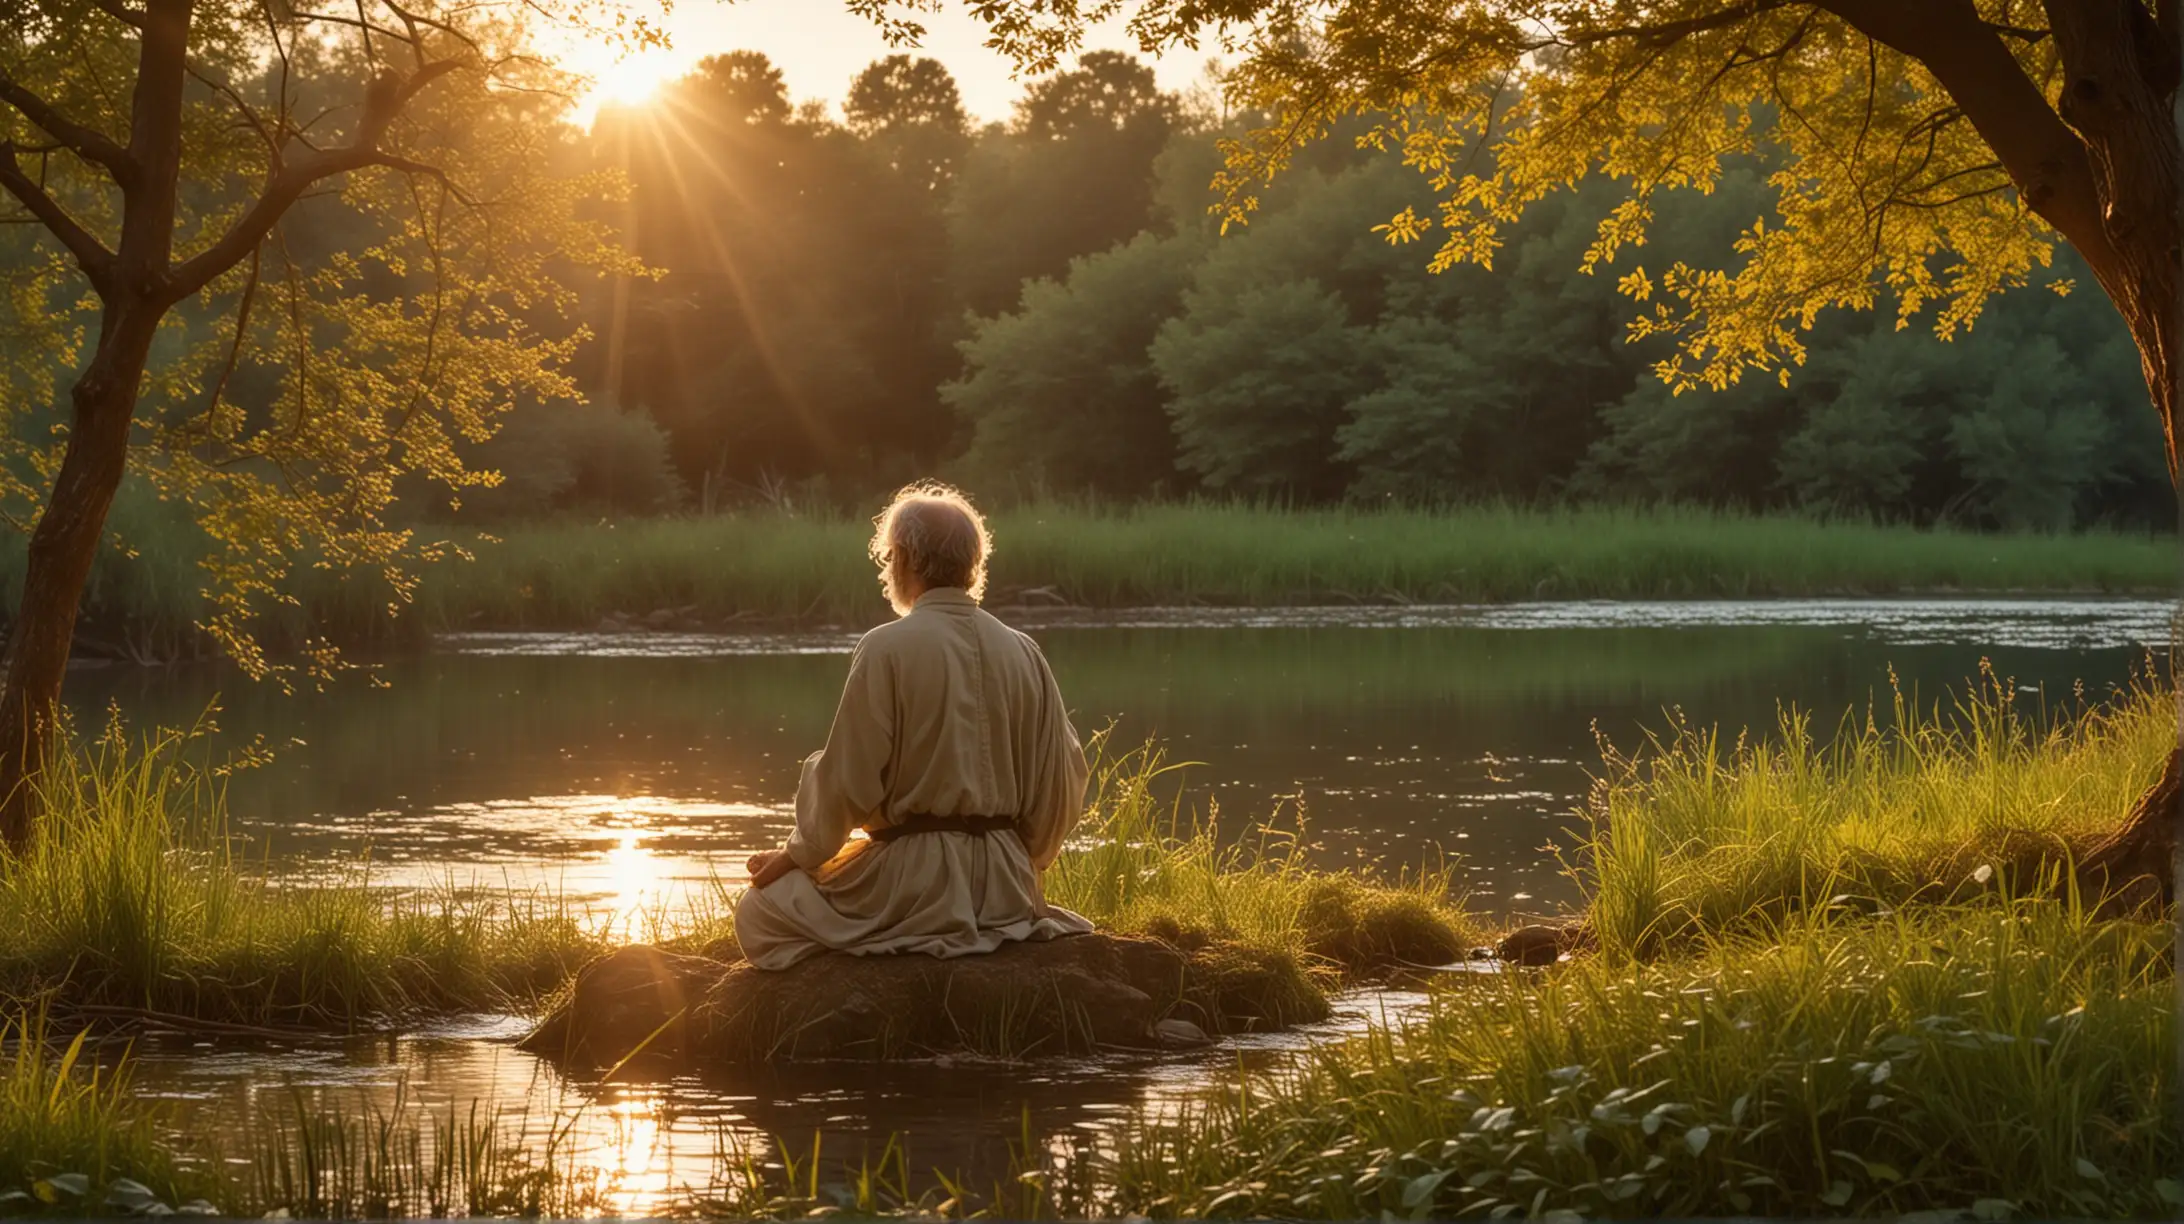 Stoic Philosopher Meditating by Tranquil River at Sunset